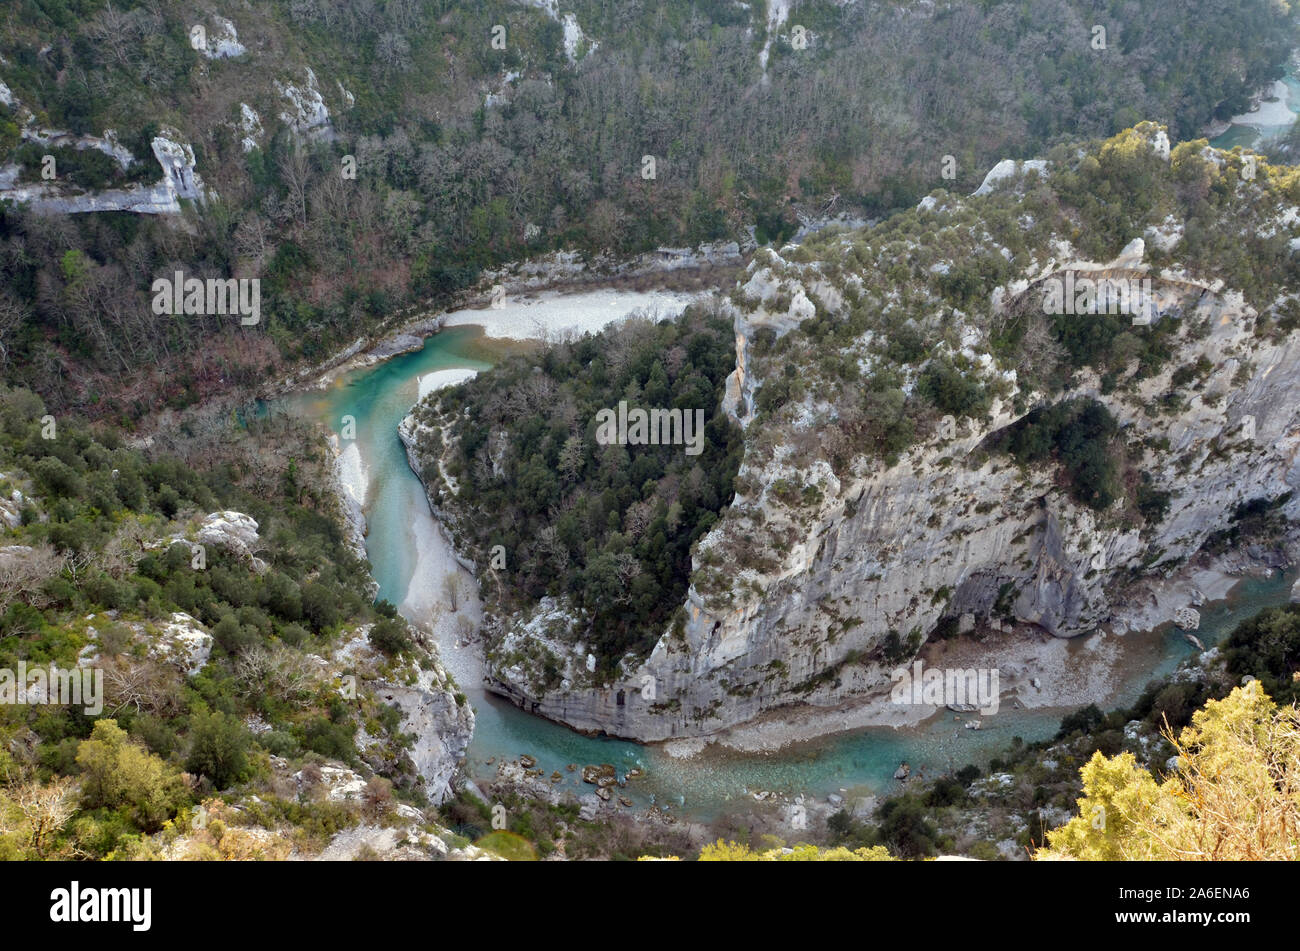 Junctions of rivers Arturby and Verdon in the gorges of Verdon. Alpes de haute Provence France Stock Photo